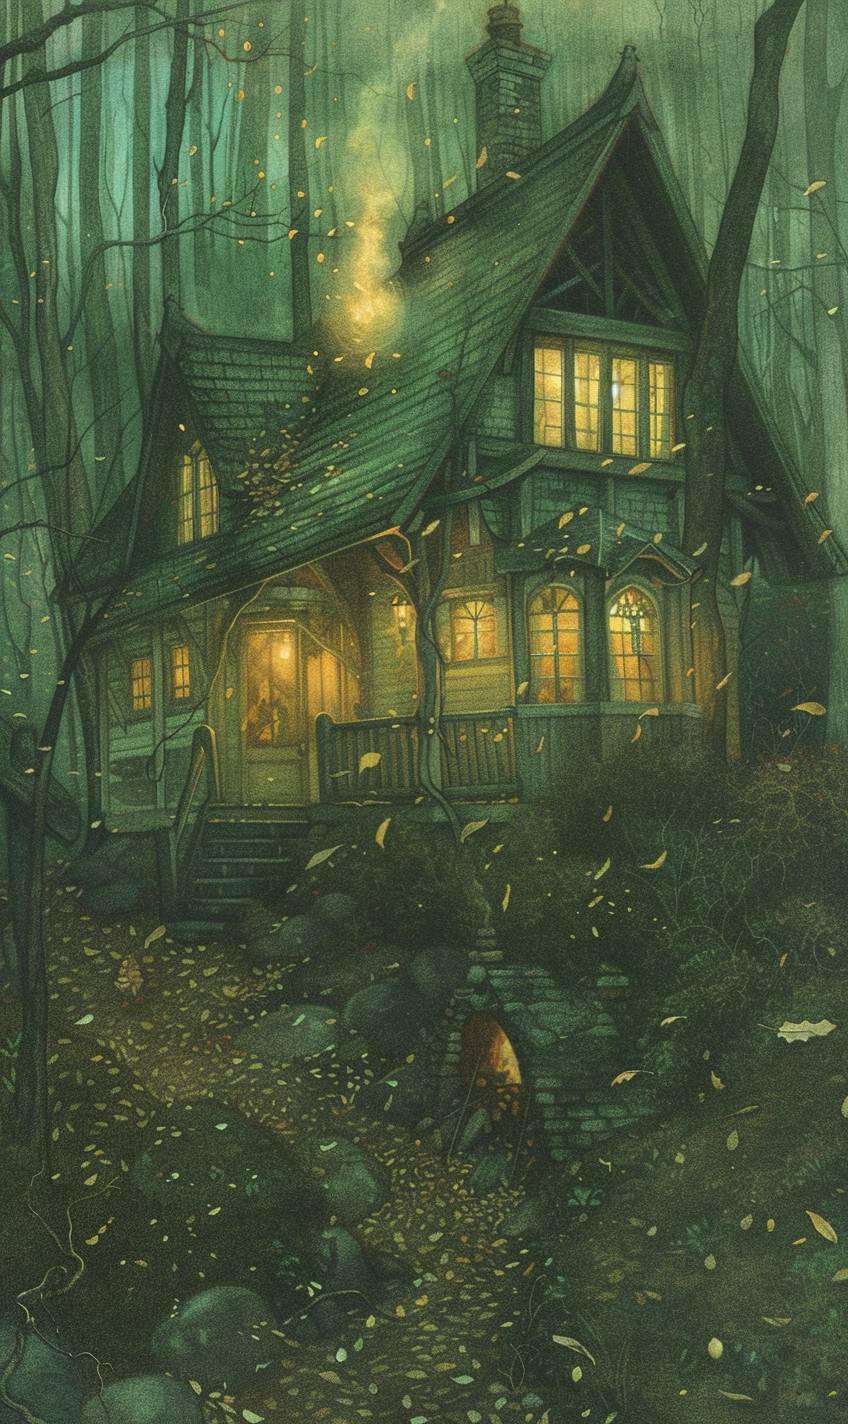 A cozy cottage in the woods during autumn, warm light glowing from the windows, leaves falling gently, smoke rising from the chimney